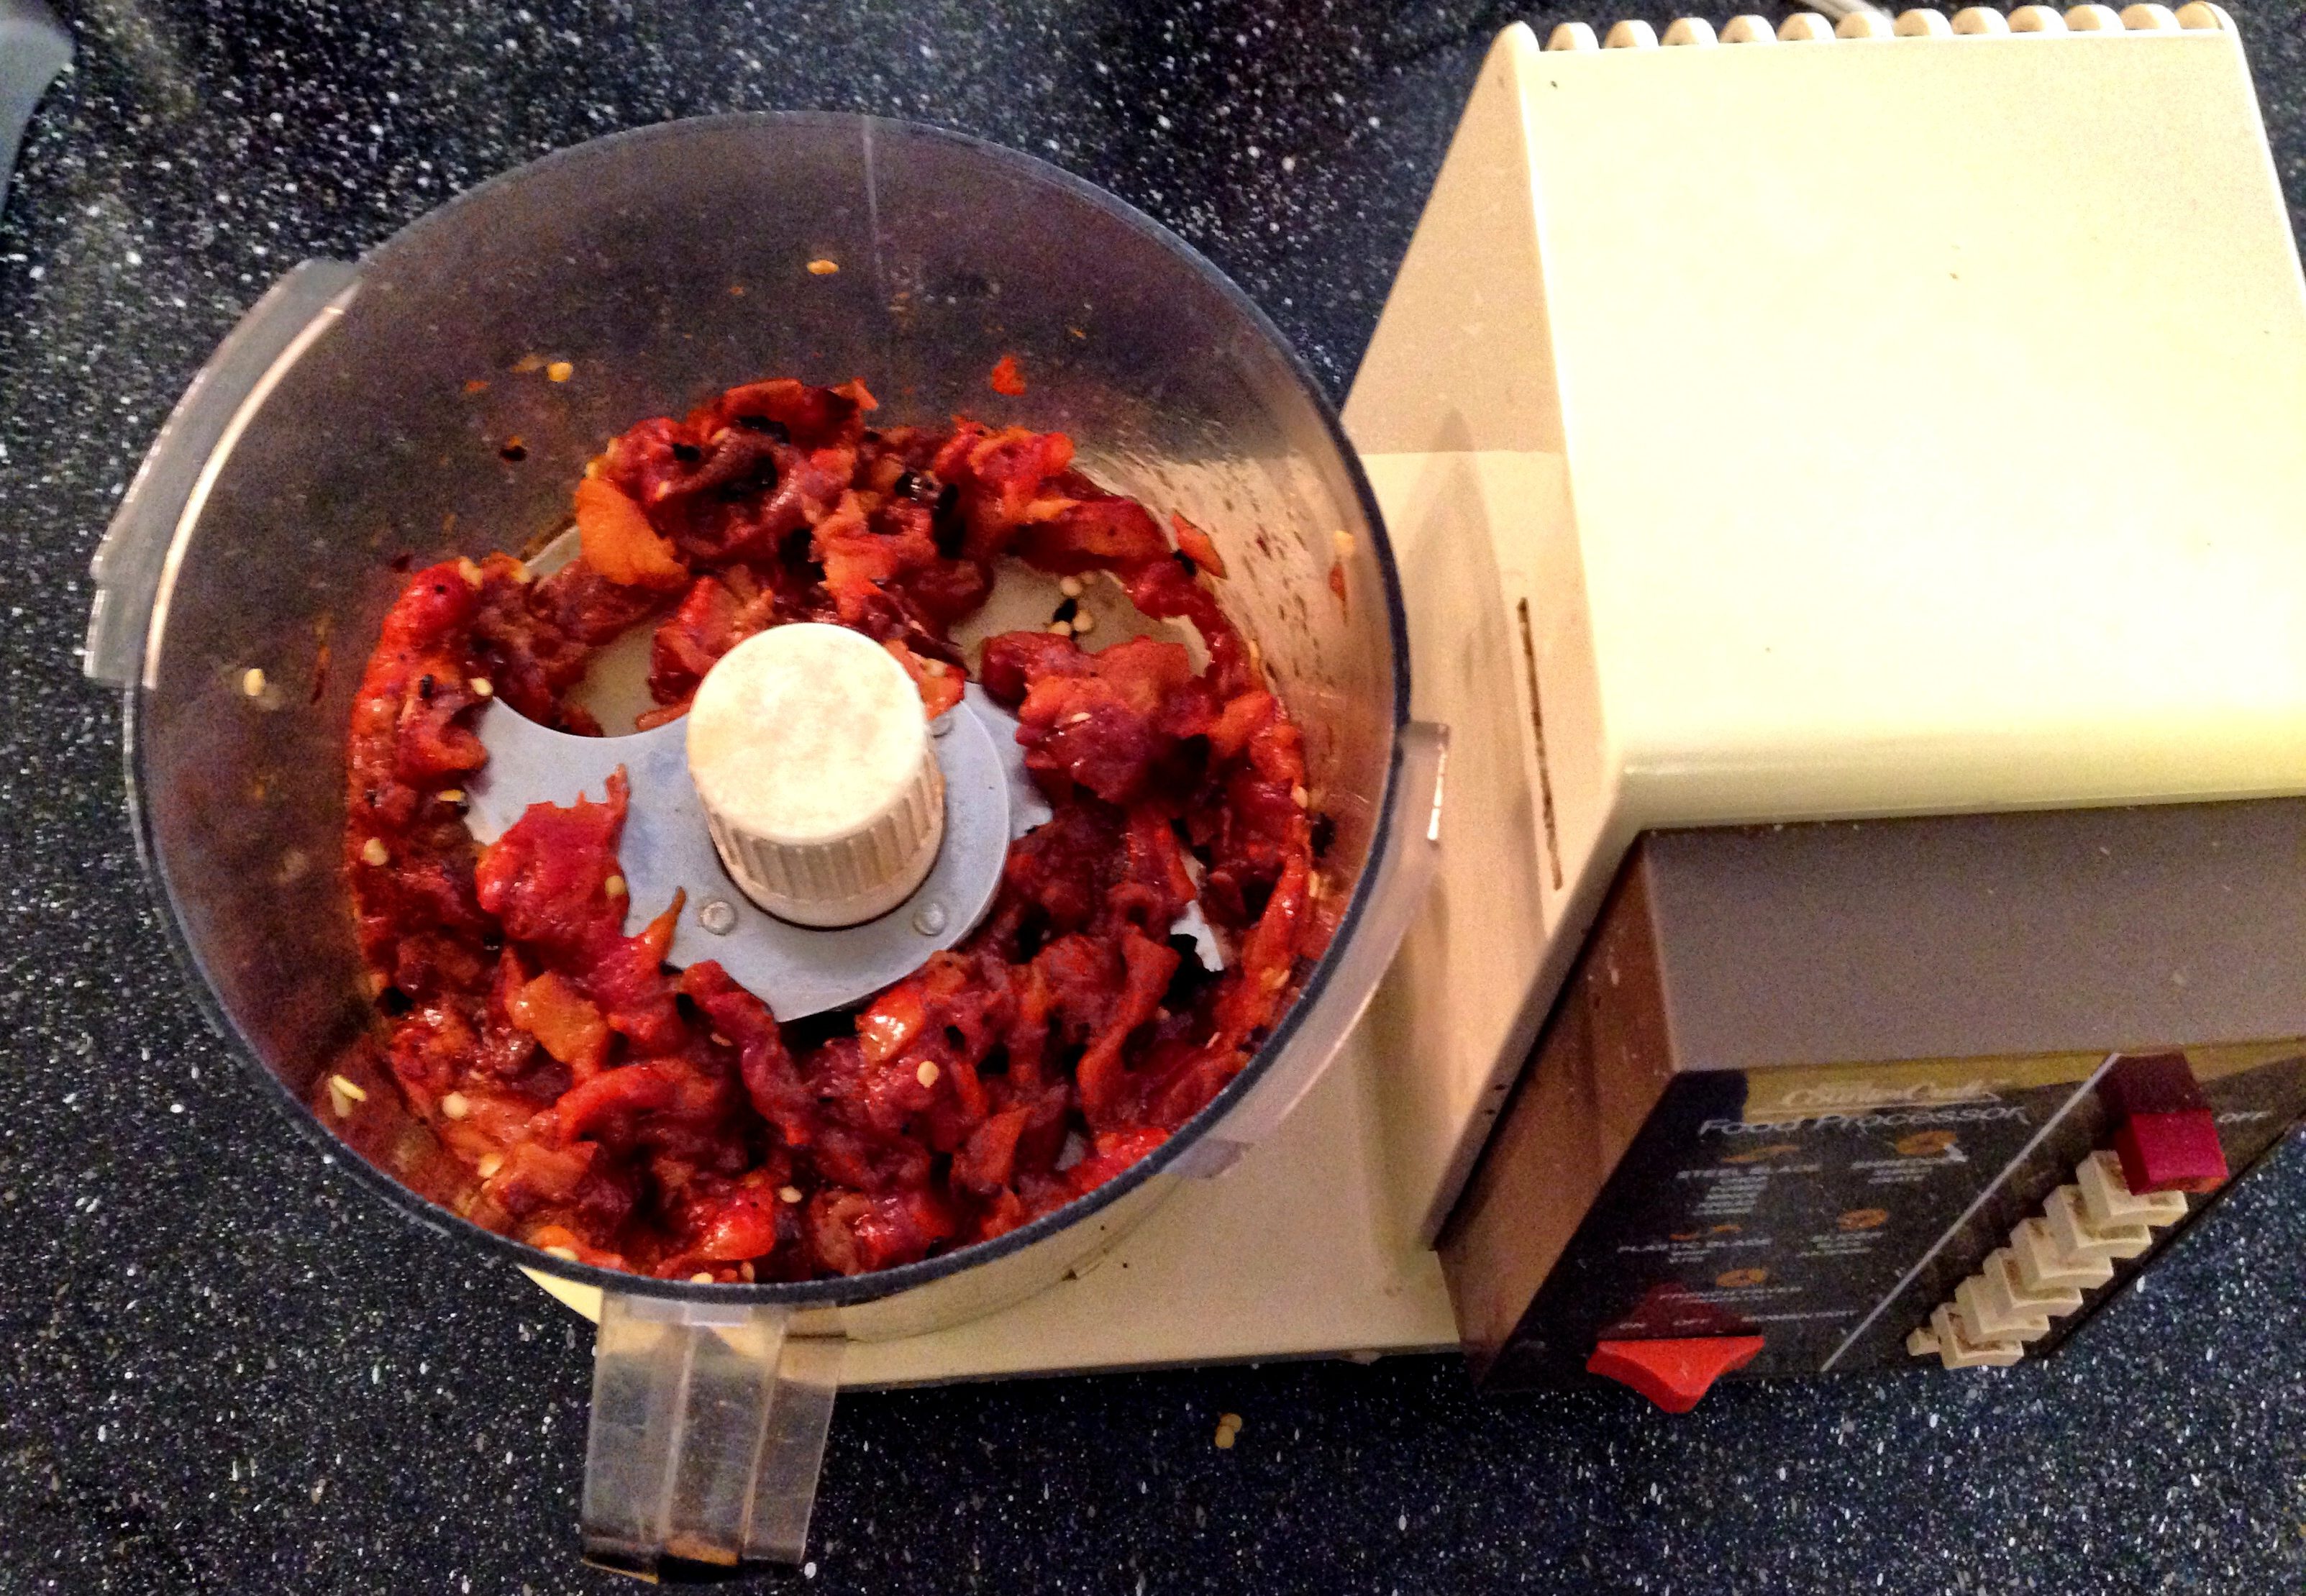 Step 5: Place pepper slices in food processor and grind until smooth.